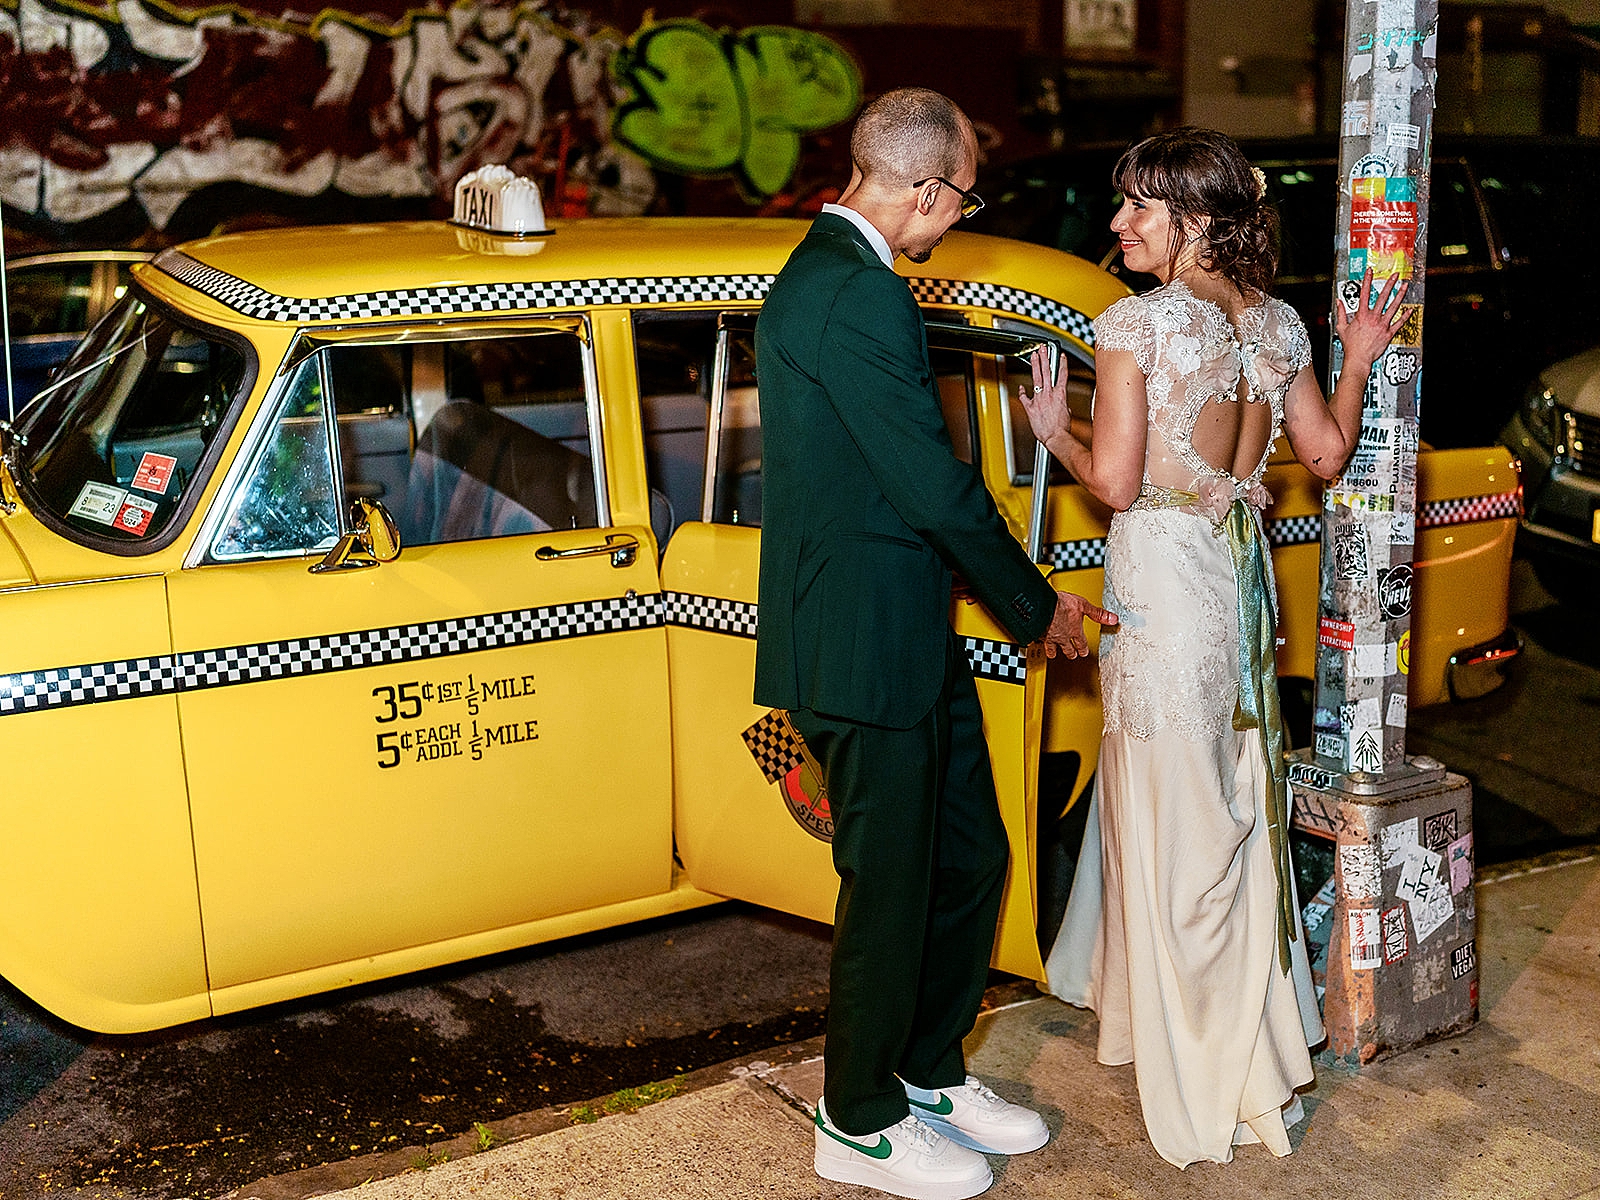 Shot of the groom escorting the bride into a vintage taxicab.